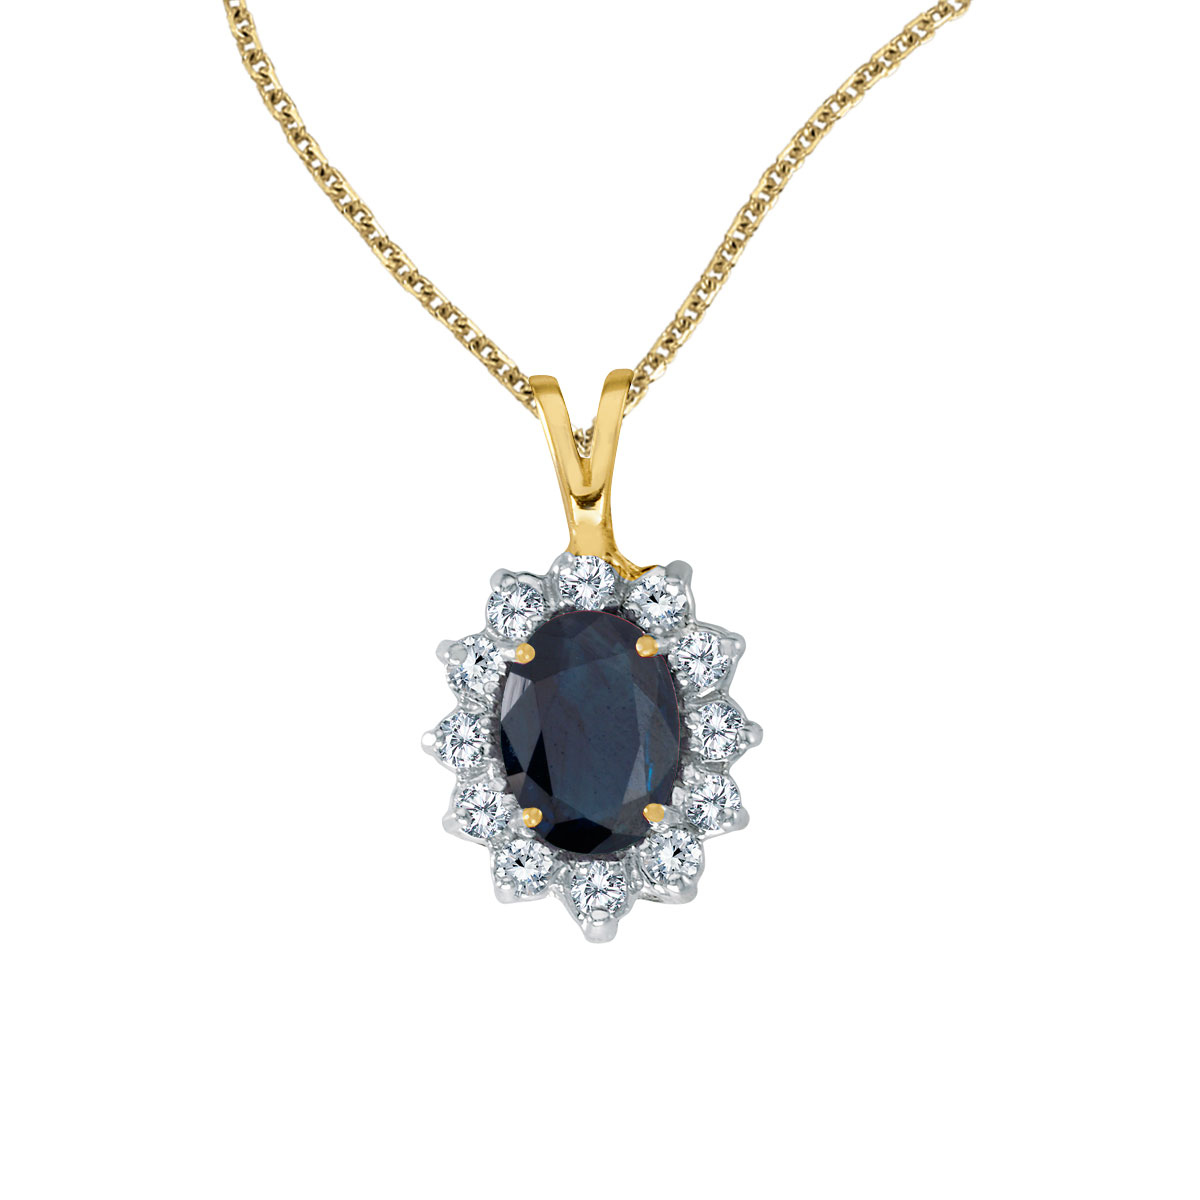 8x6 mm sapphire surrounded by .30 carats of shimmering diamonds set in 14k yellow gold. Perfect f...